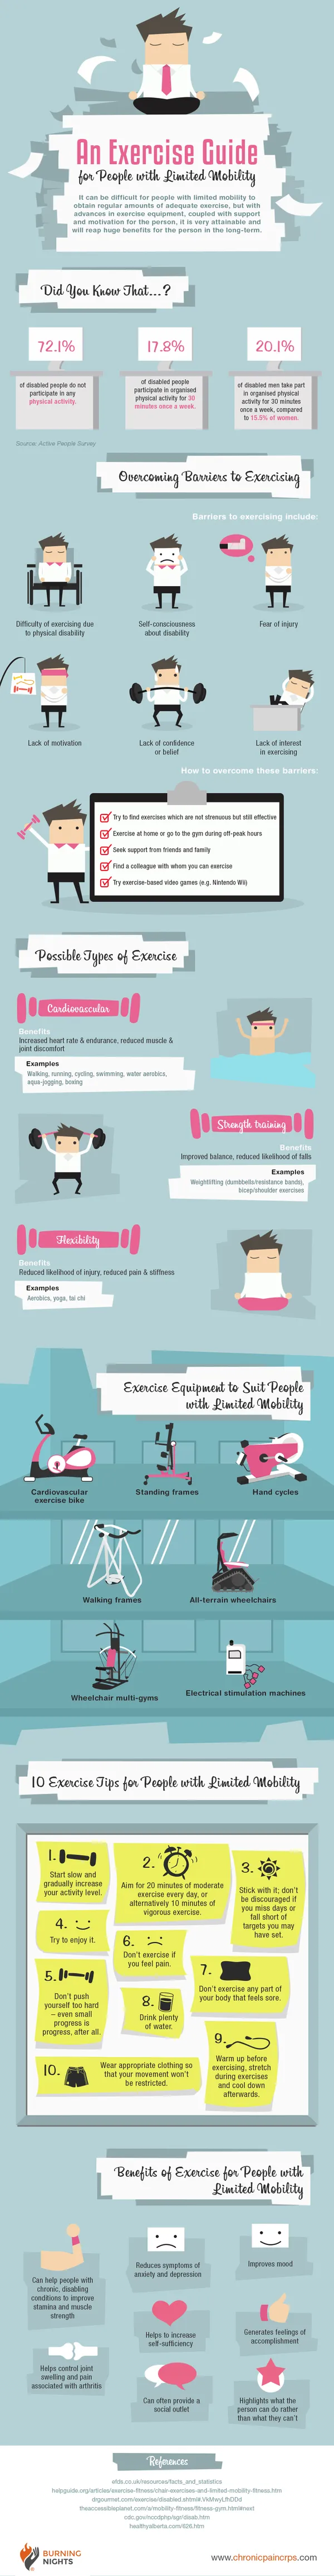 An-Exercise-Guide-for-People-with-Limited-Mobility-Infographic